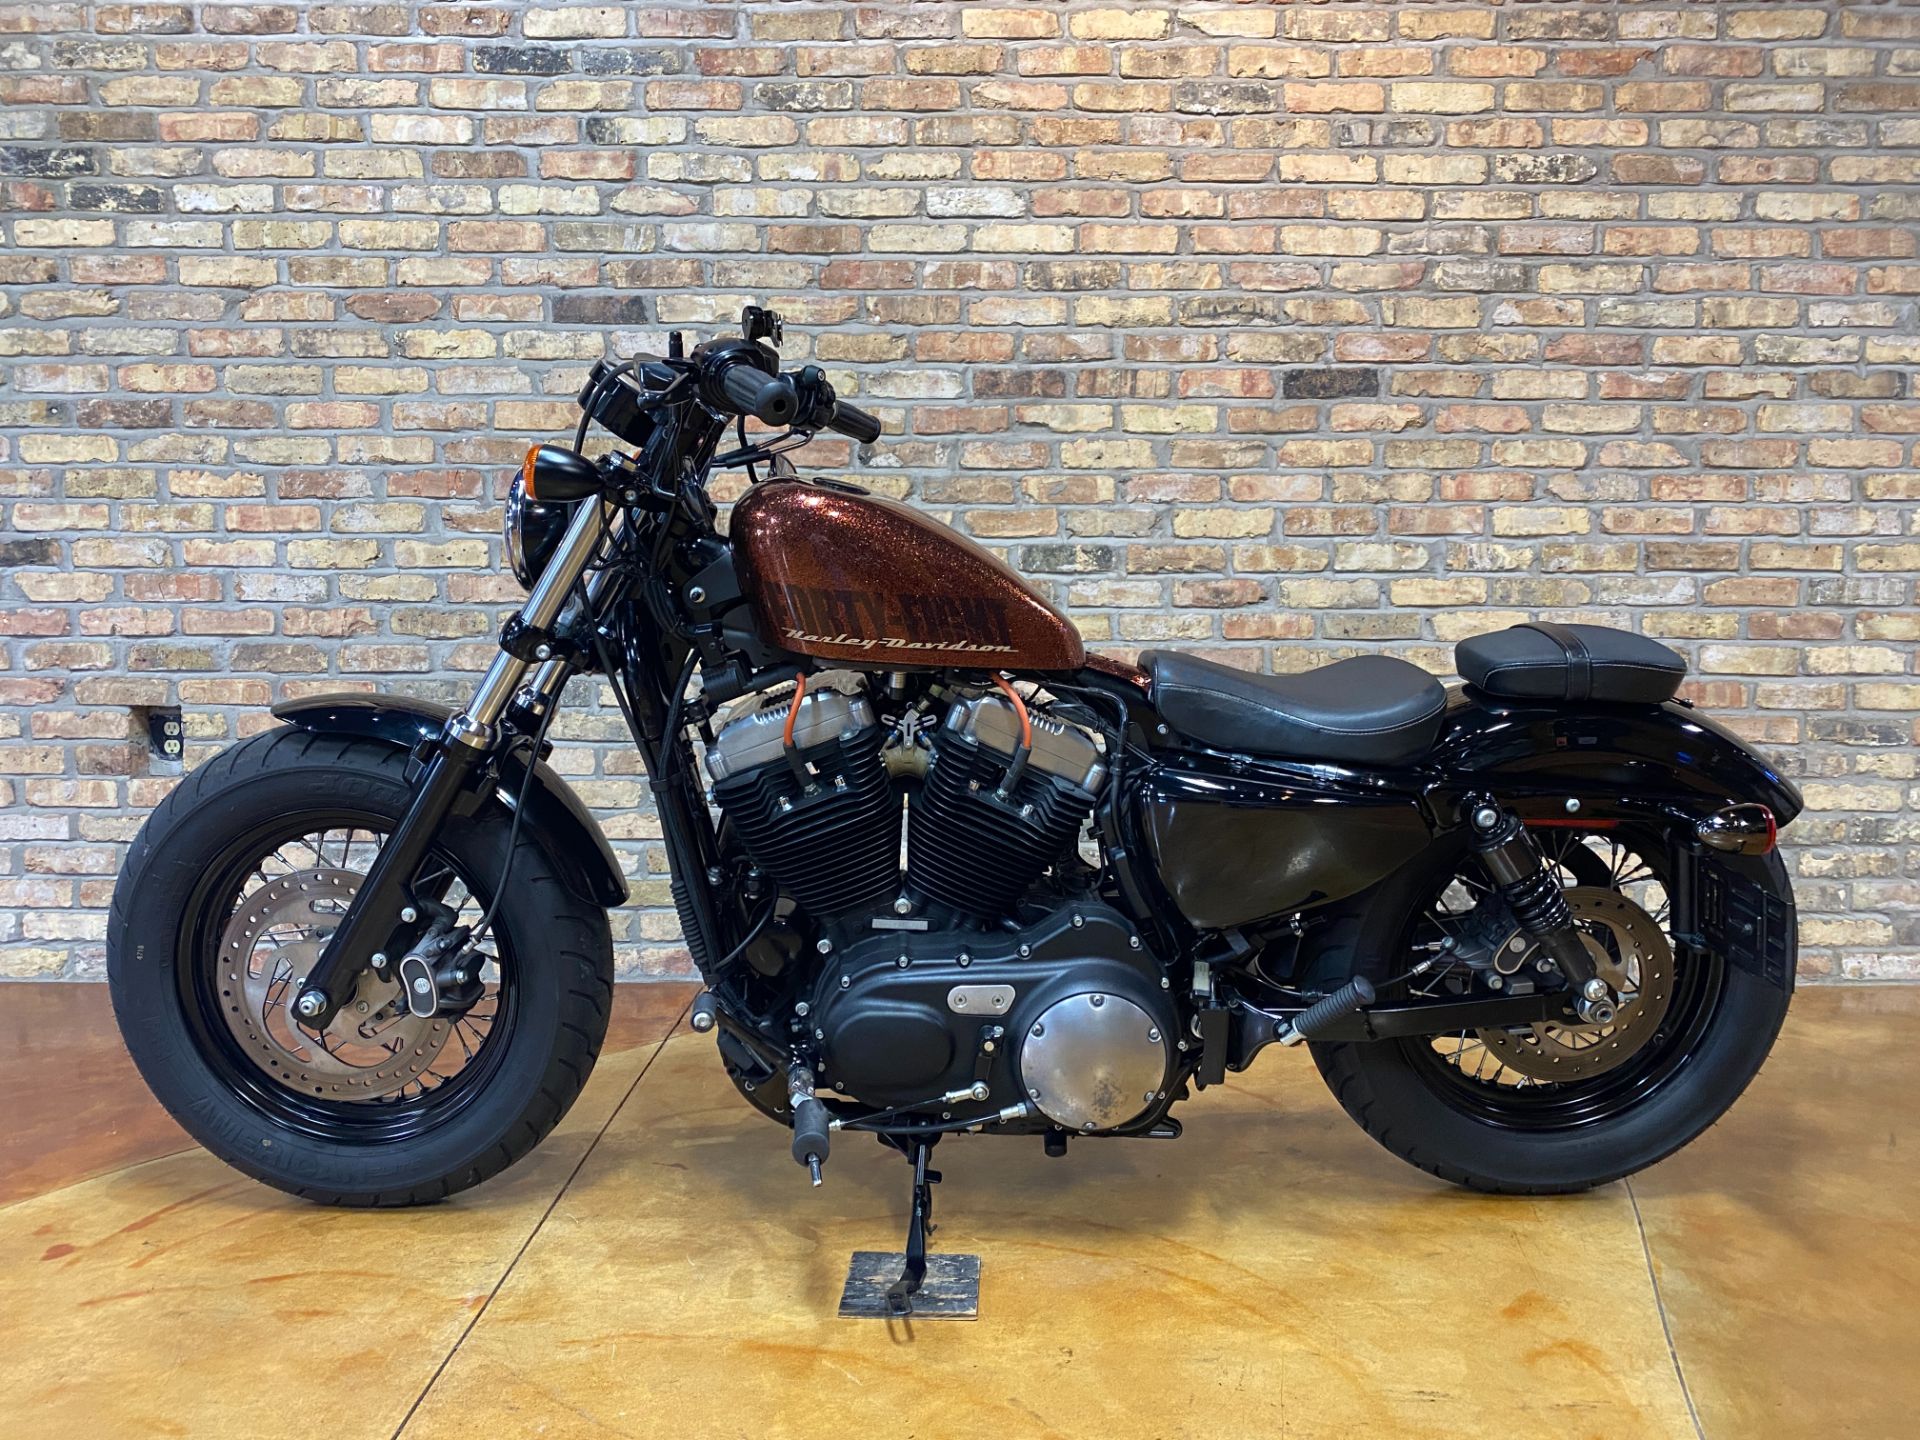 2014 Harley-Davidson Sportster® Forty-Eight® in Big Bend, Wisconsin - Photo 13